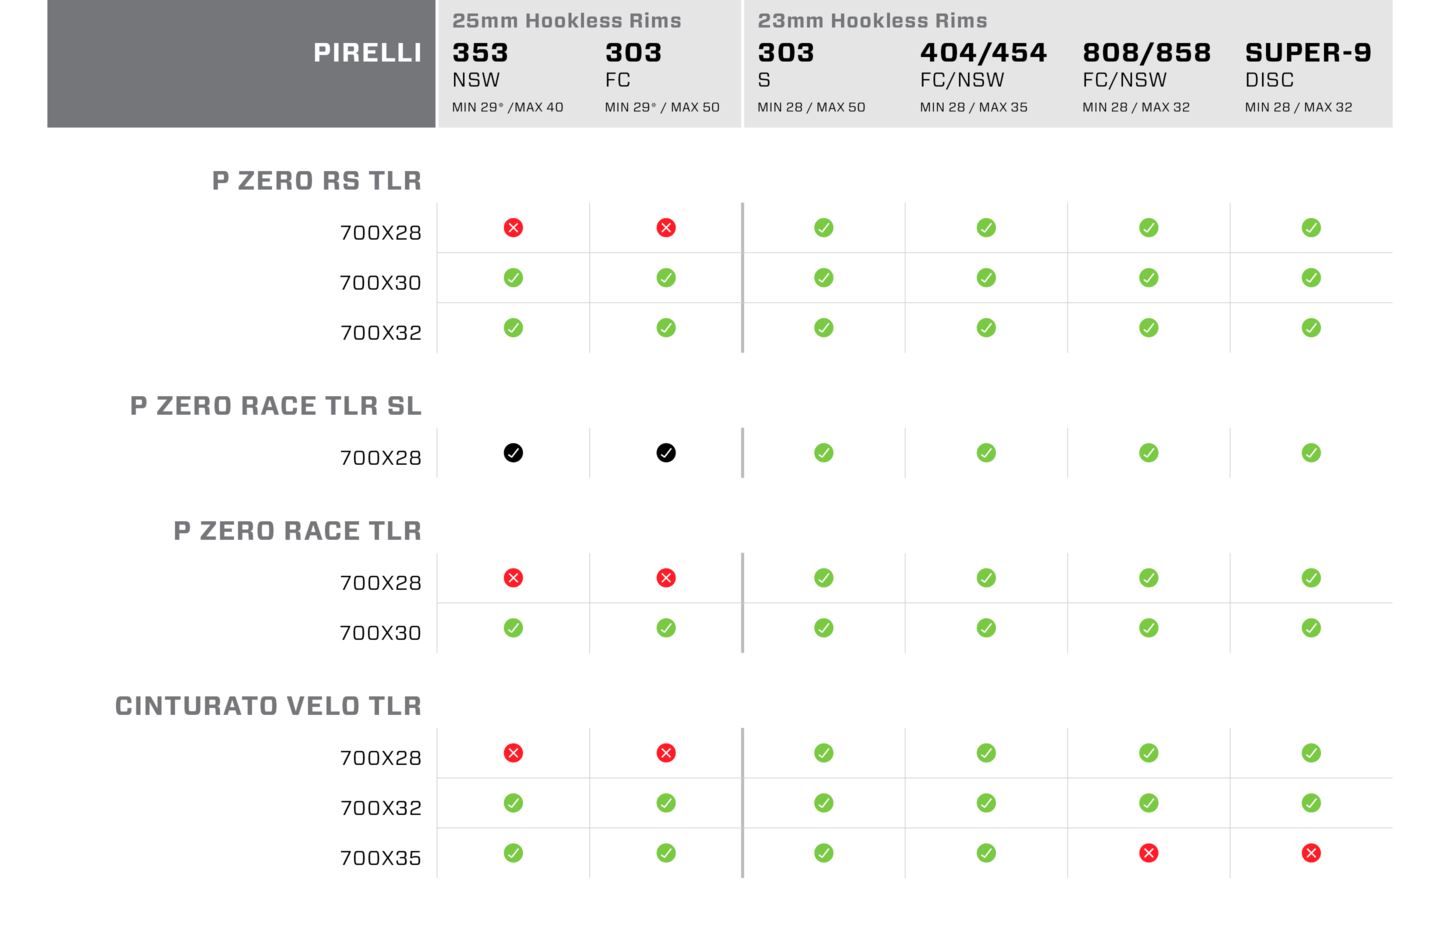 chart showing compatibility between pirelli tires and zipp wheels.